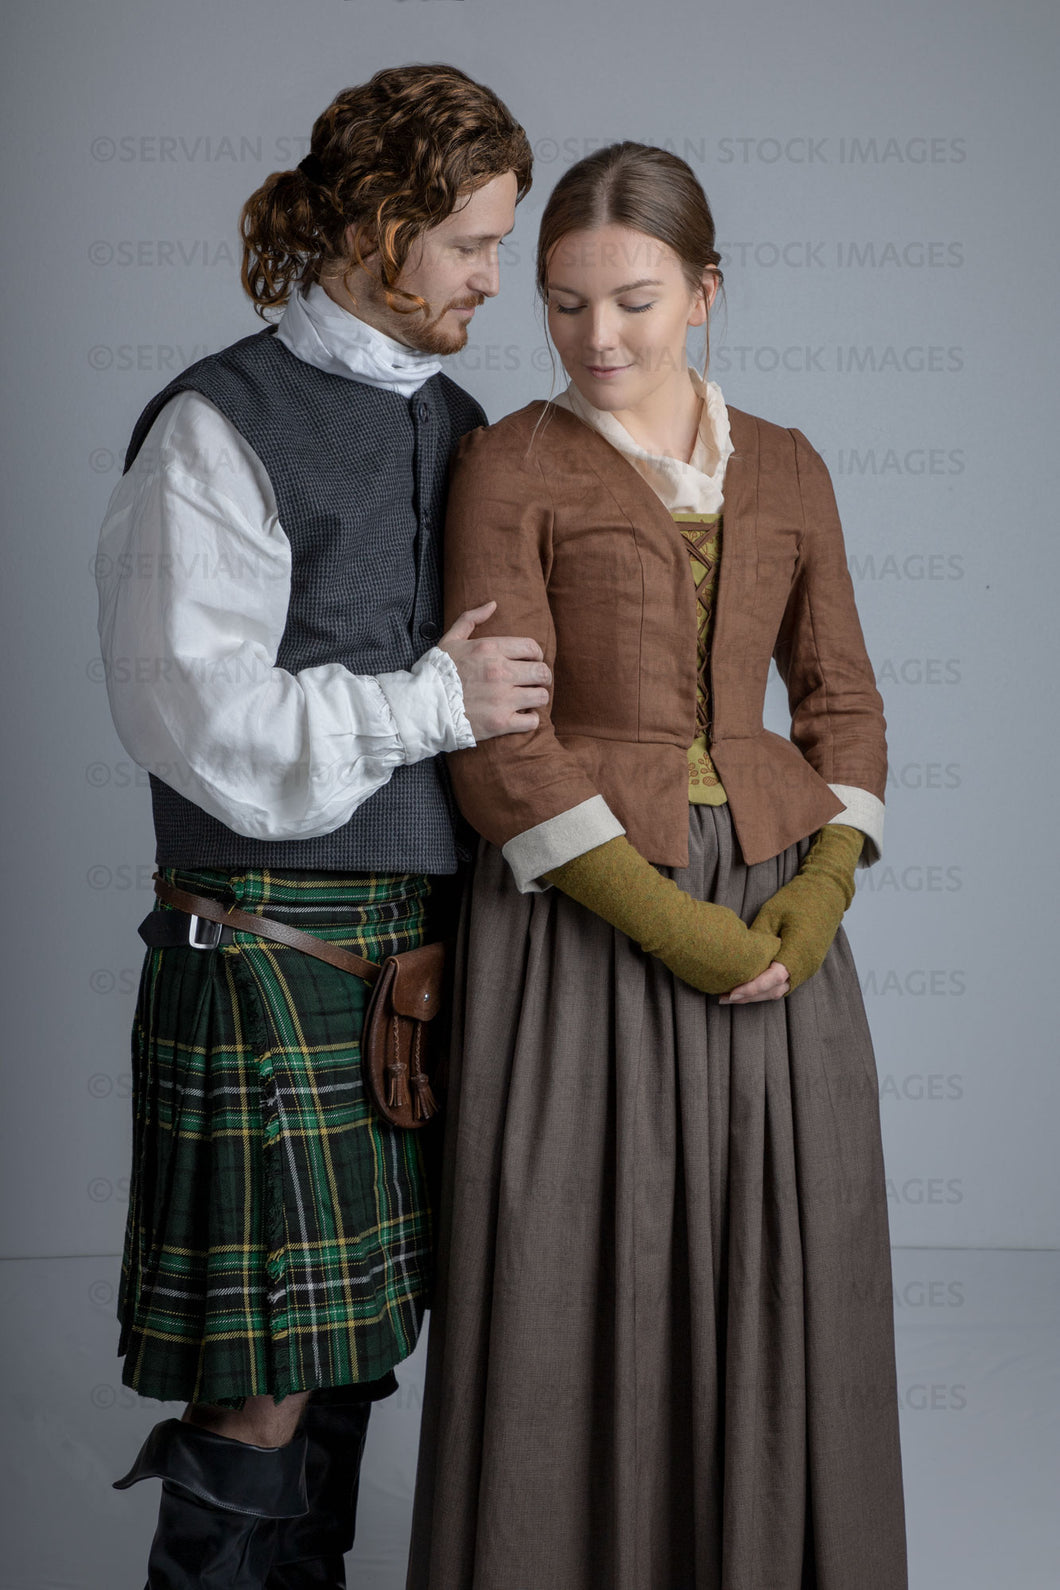 Georgian Scottish couple against a light grey backdrop (Tayla and Aaron 1120)